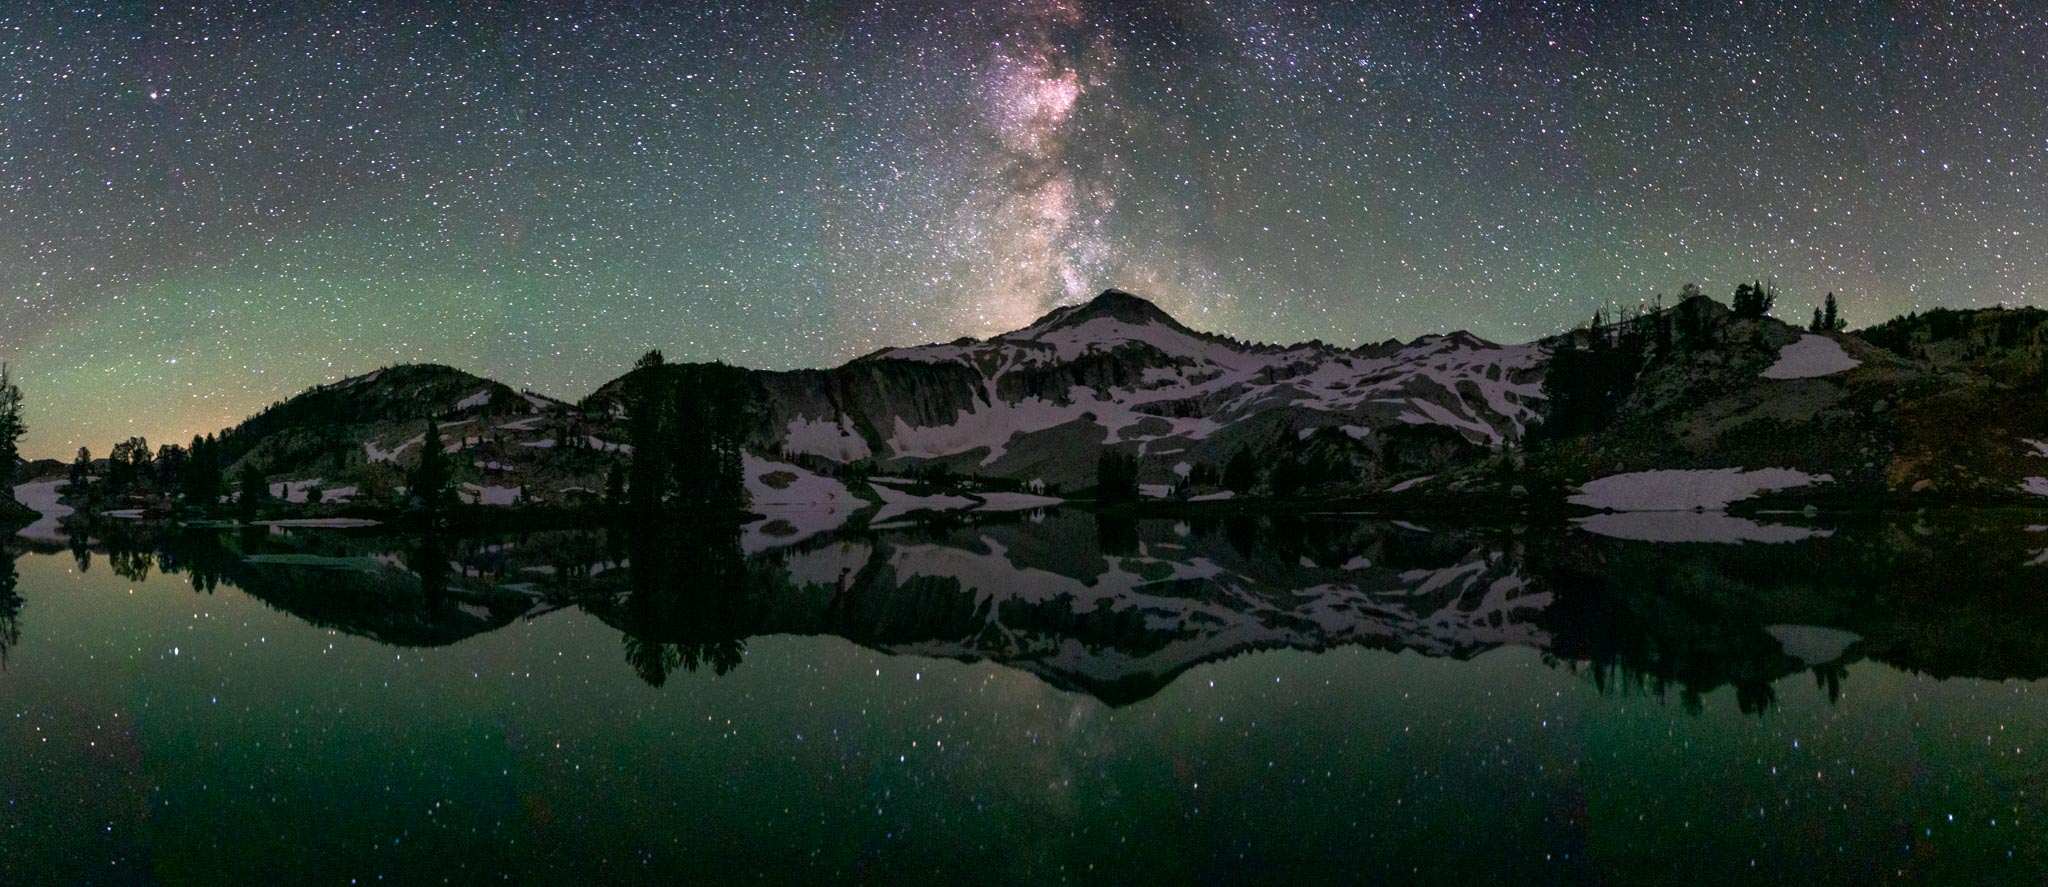 The milkyway above Glacier Lake in the Wallowa Mountains.